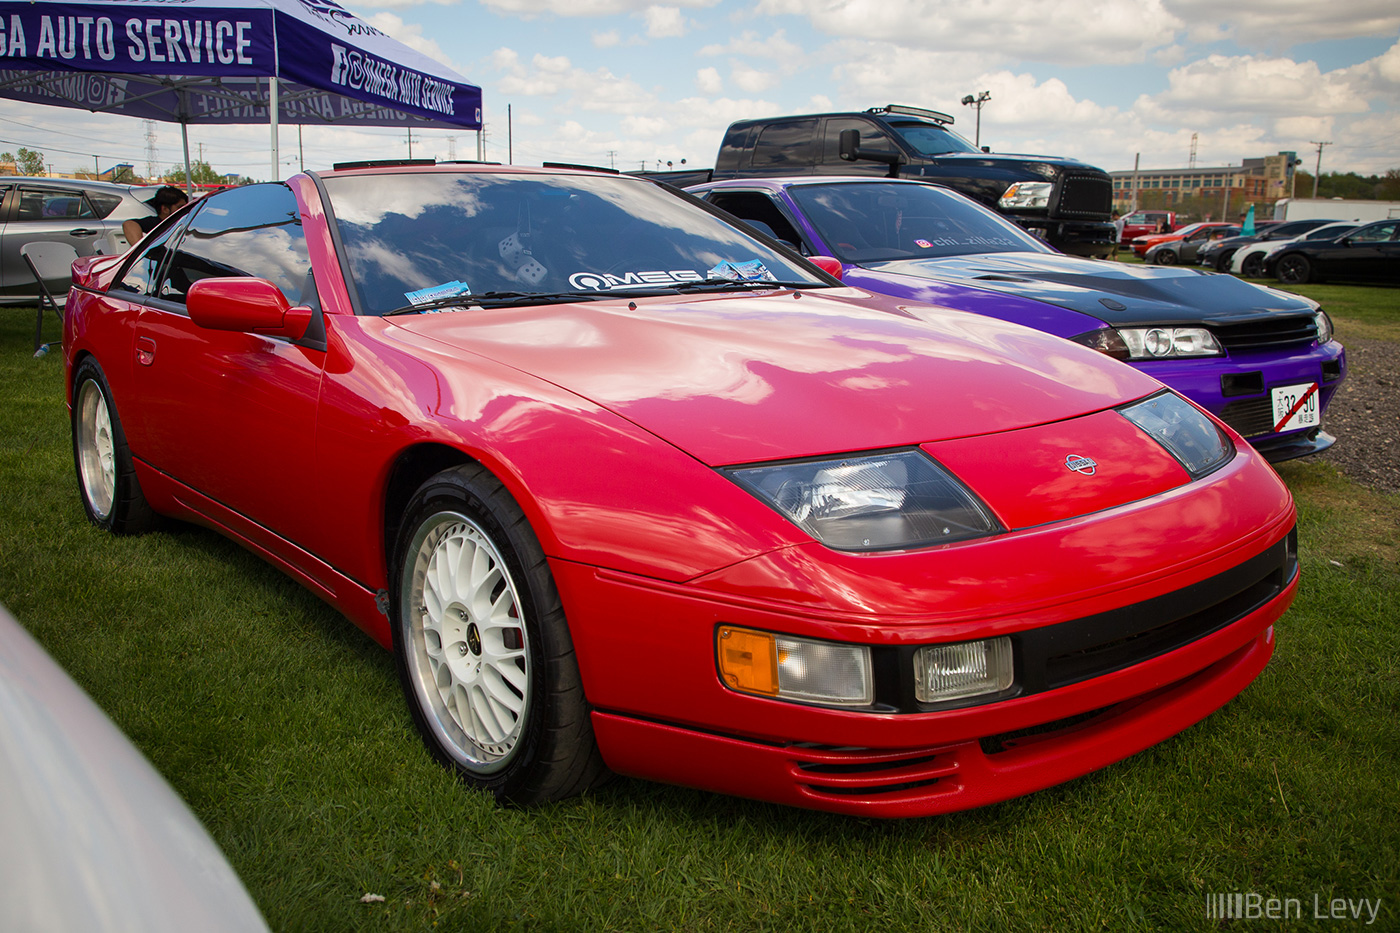 Red 300ZX at Omega Booth at IFO